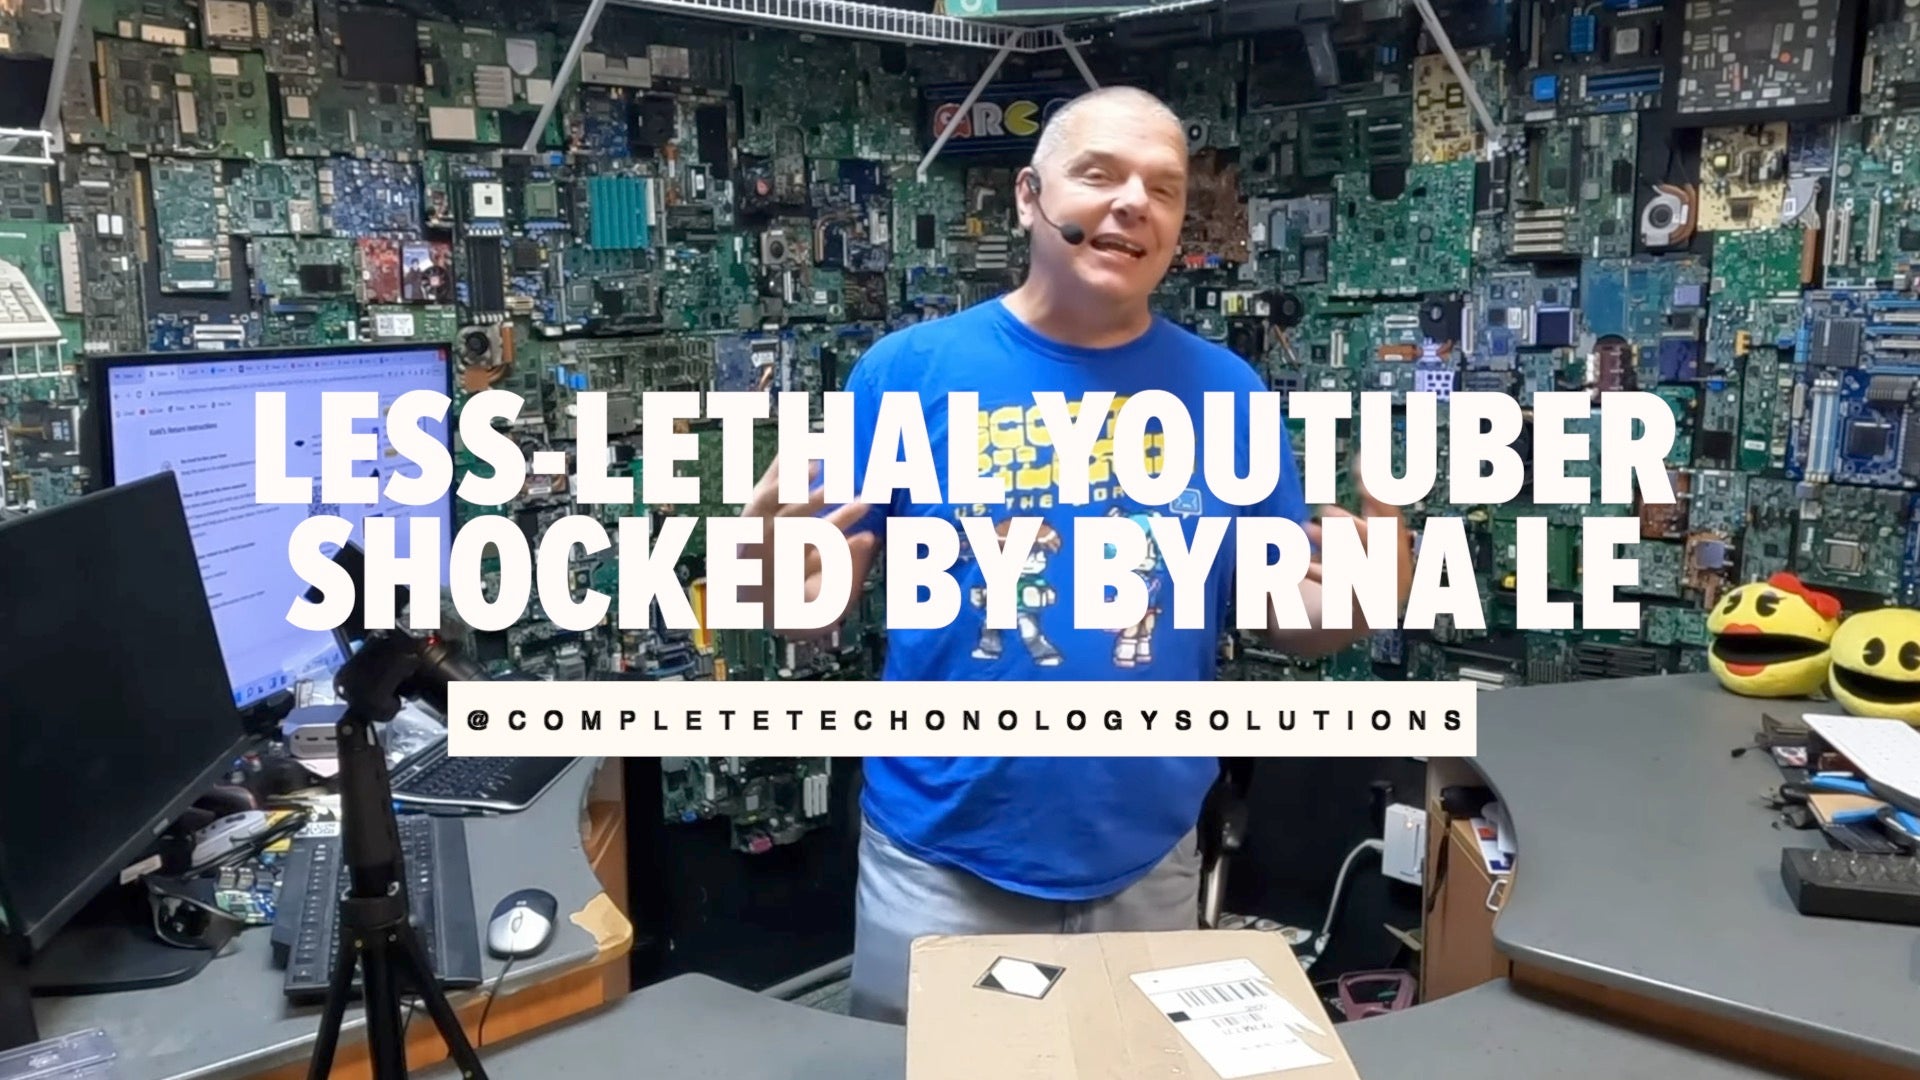 LESS-LETHAL YOUTUBER SHOCKED BY BYRNA LE